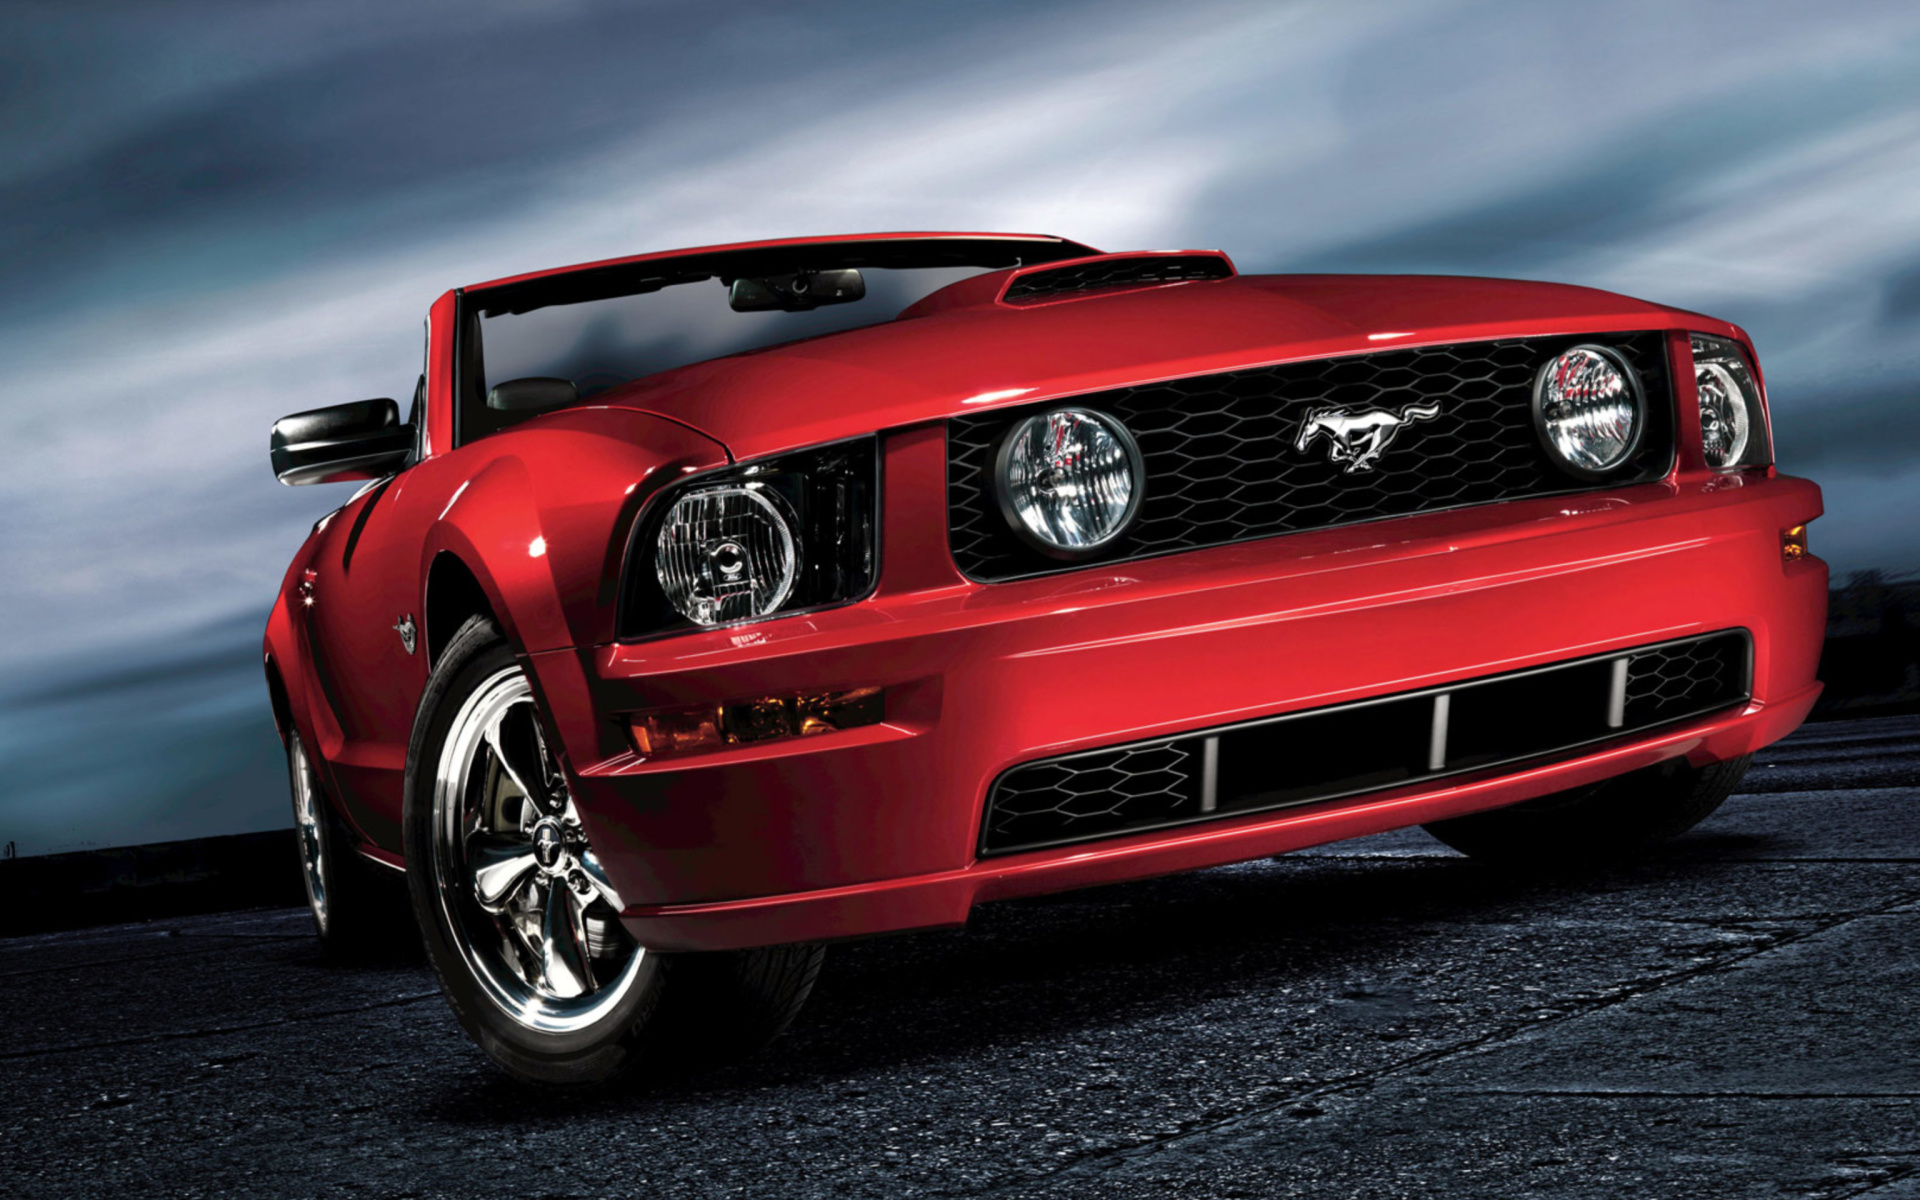 Das Ford Mustang Shelby GT500 Wallpaper 1920x1200